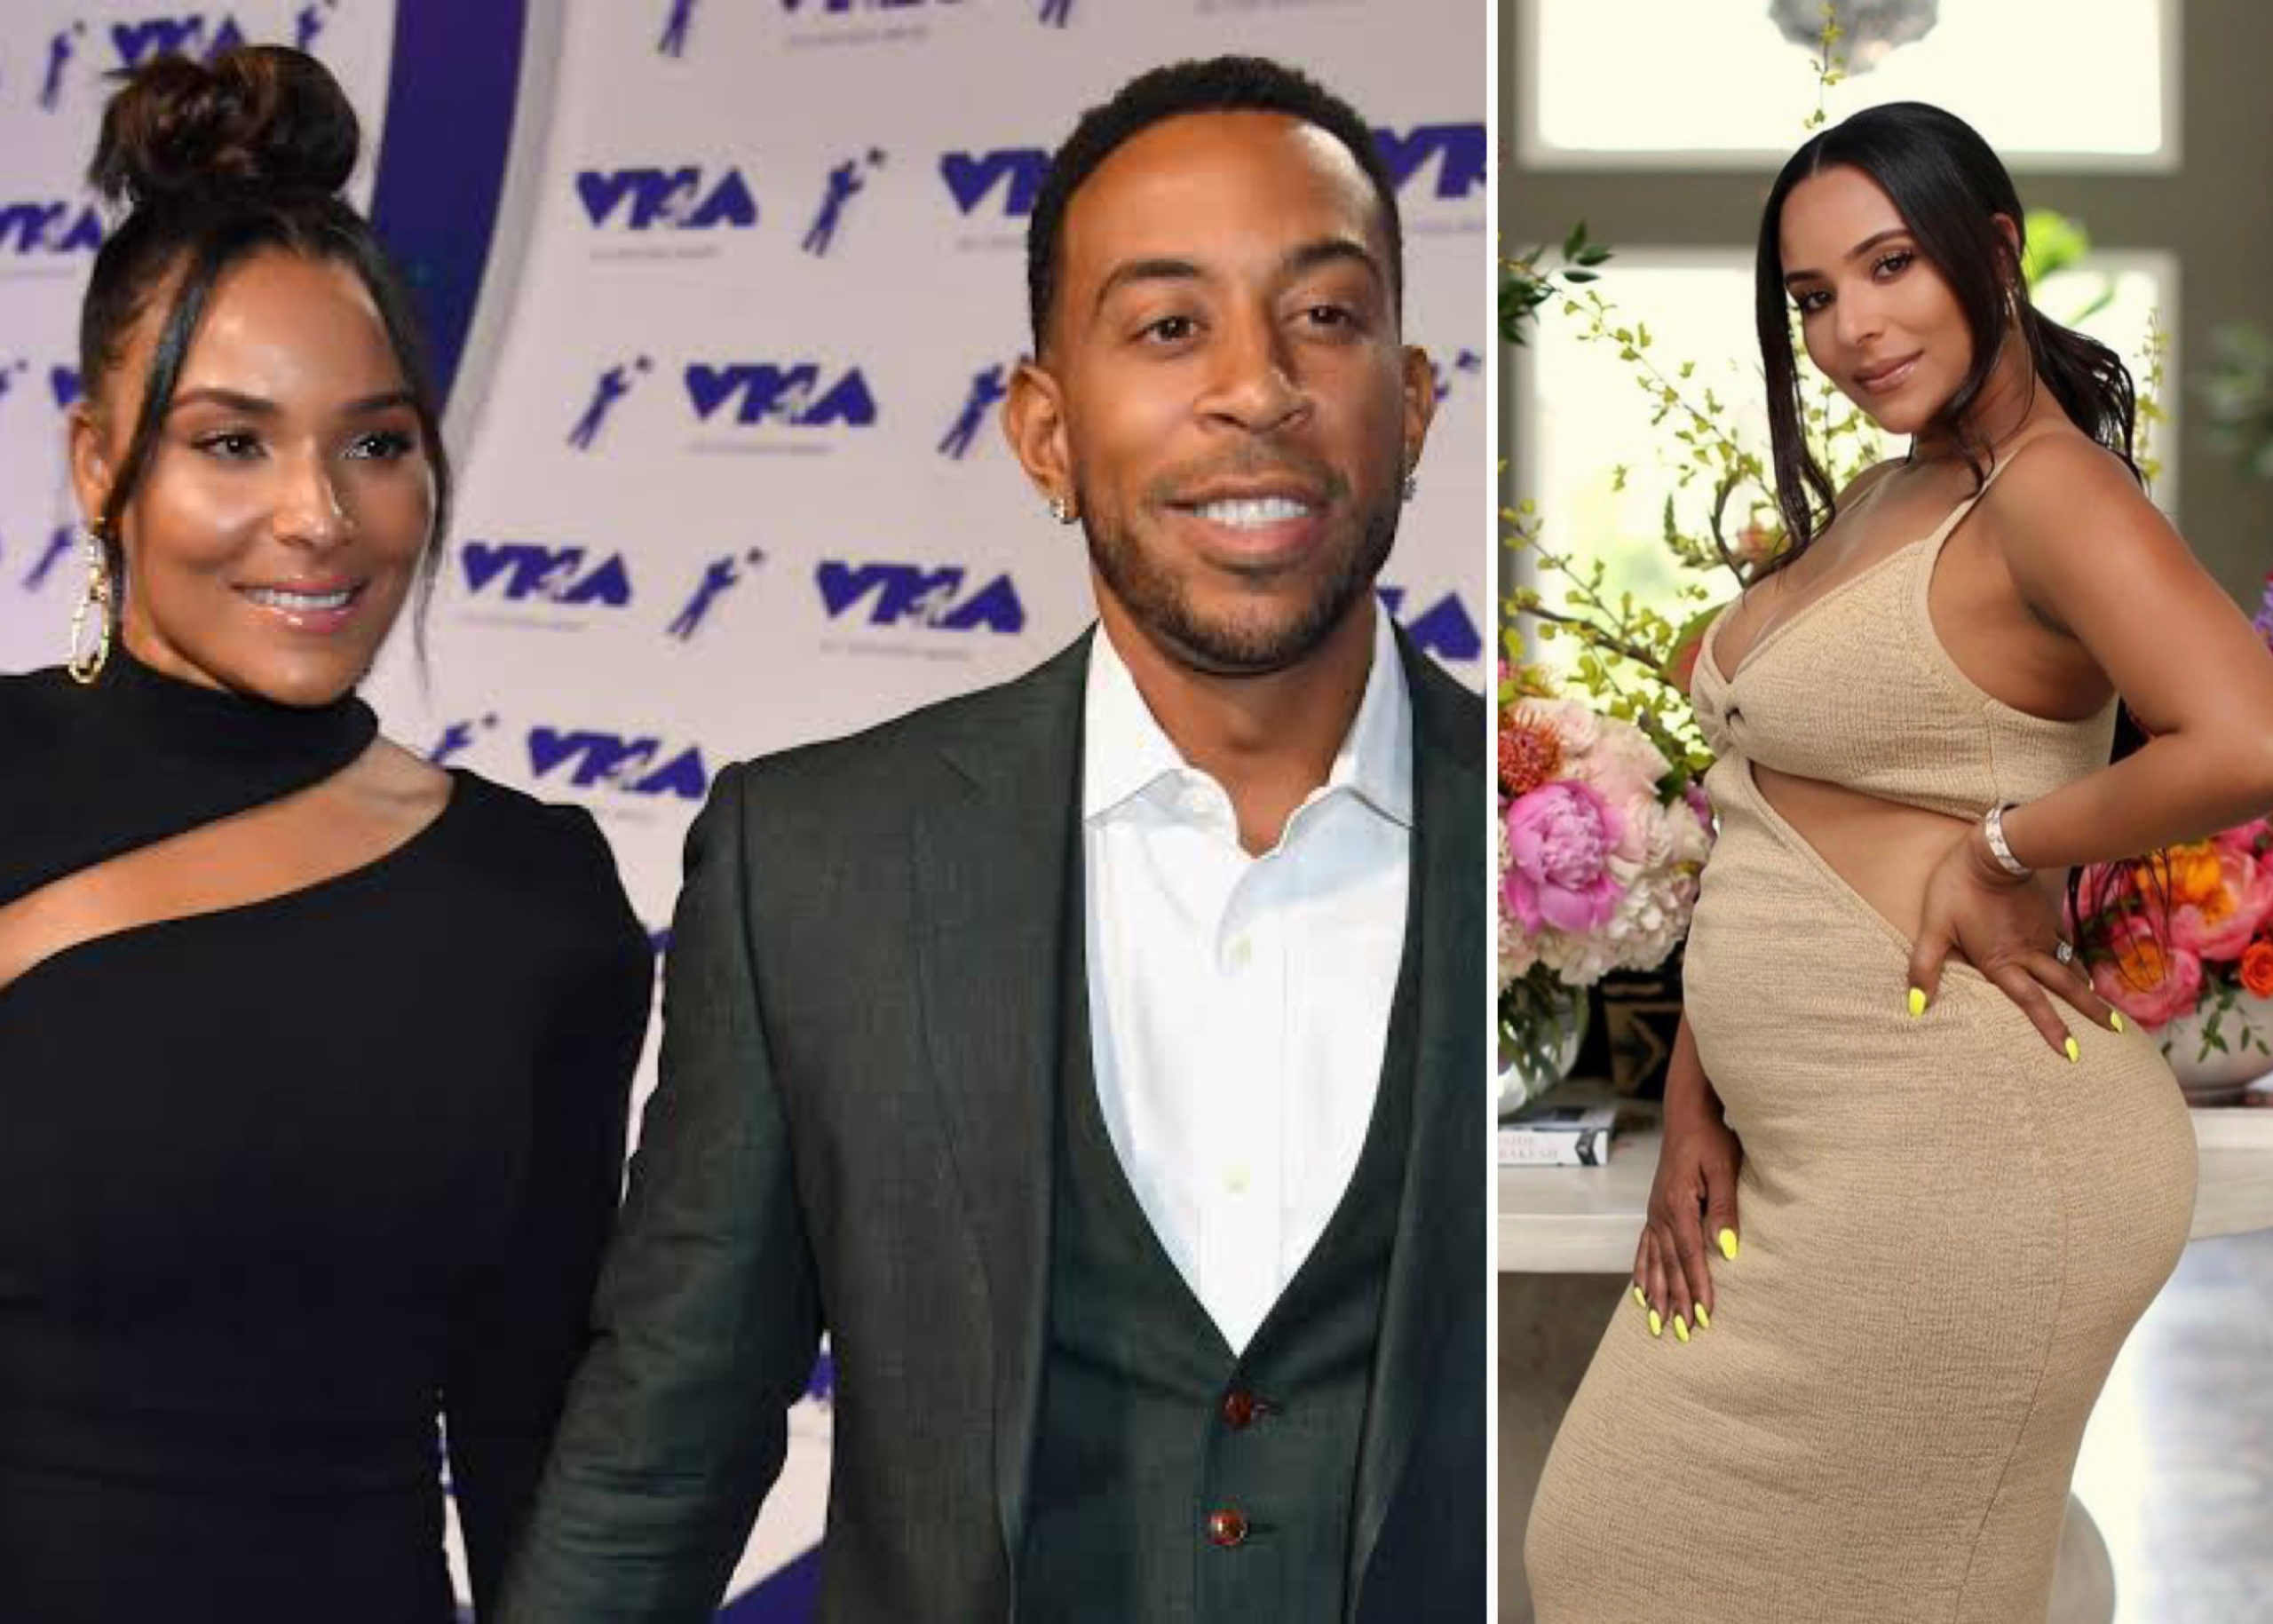 Rapper Ludacris And Wife, Eudoxie Mbouguiengue Bridges Expecting 4th Child